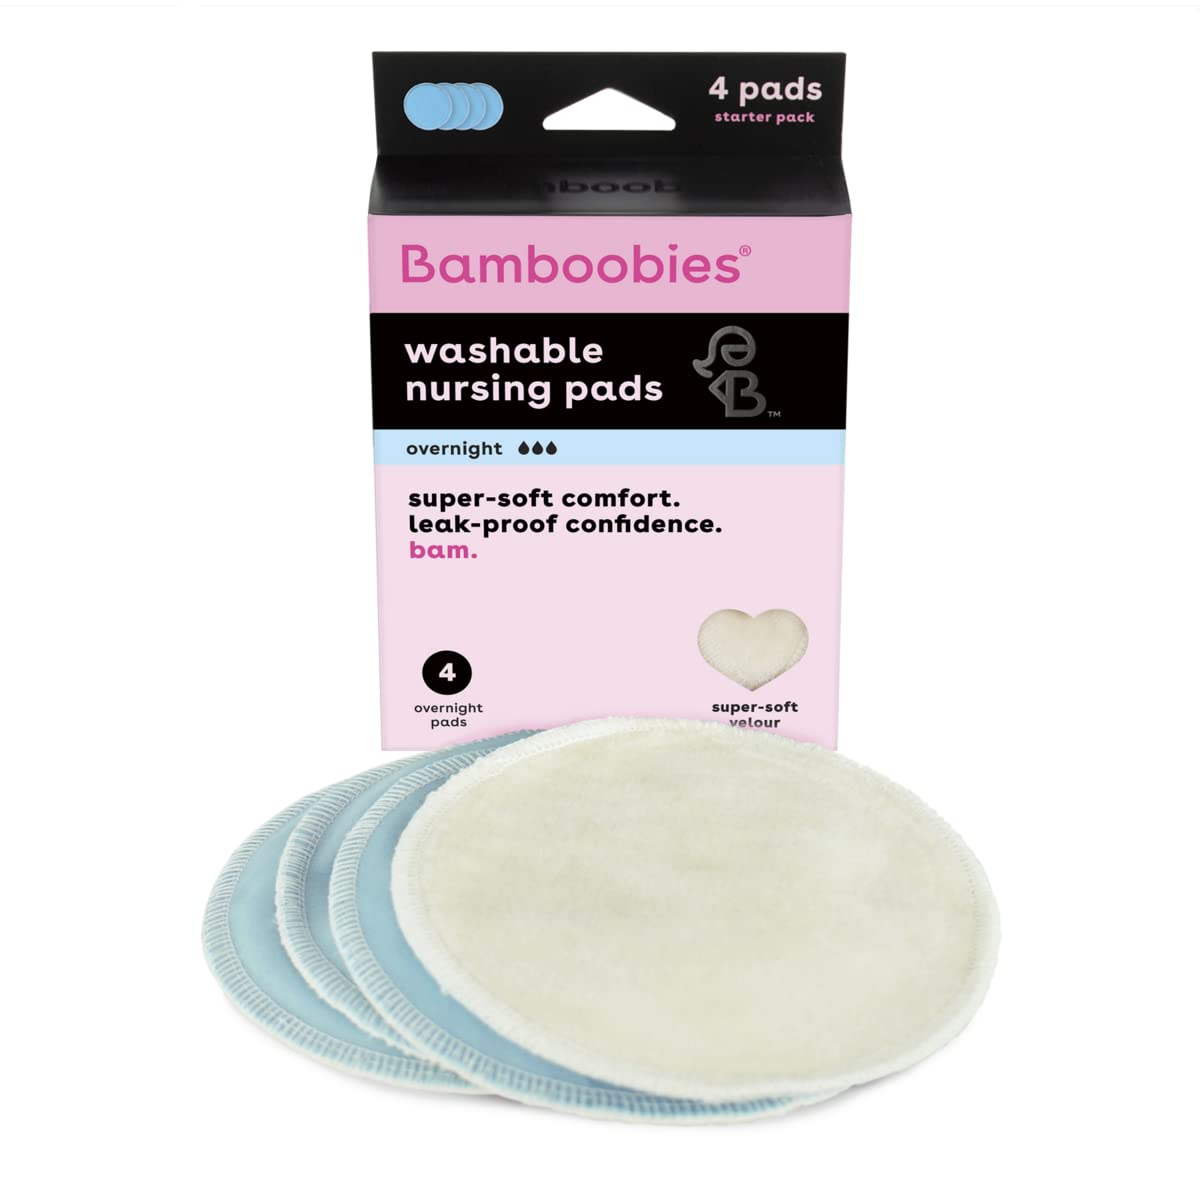 Bamboobies Reusable & Washable, Ultra-Absorbent Overnight Nursing Pads for Breastfeeding, Super Soft Rayon Made From Bamboo, Milk Proof Liner, Natural, 2.4 Oz, 4 Count